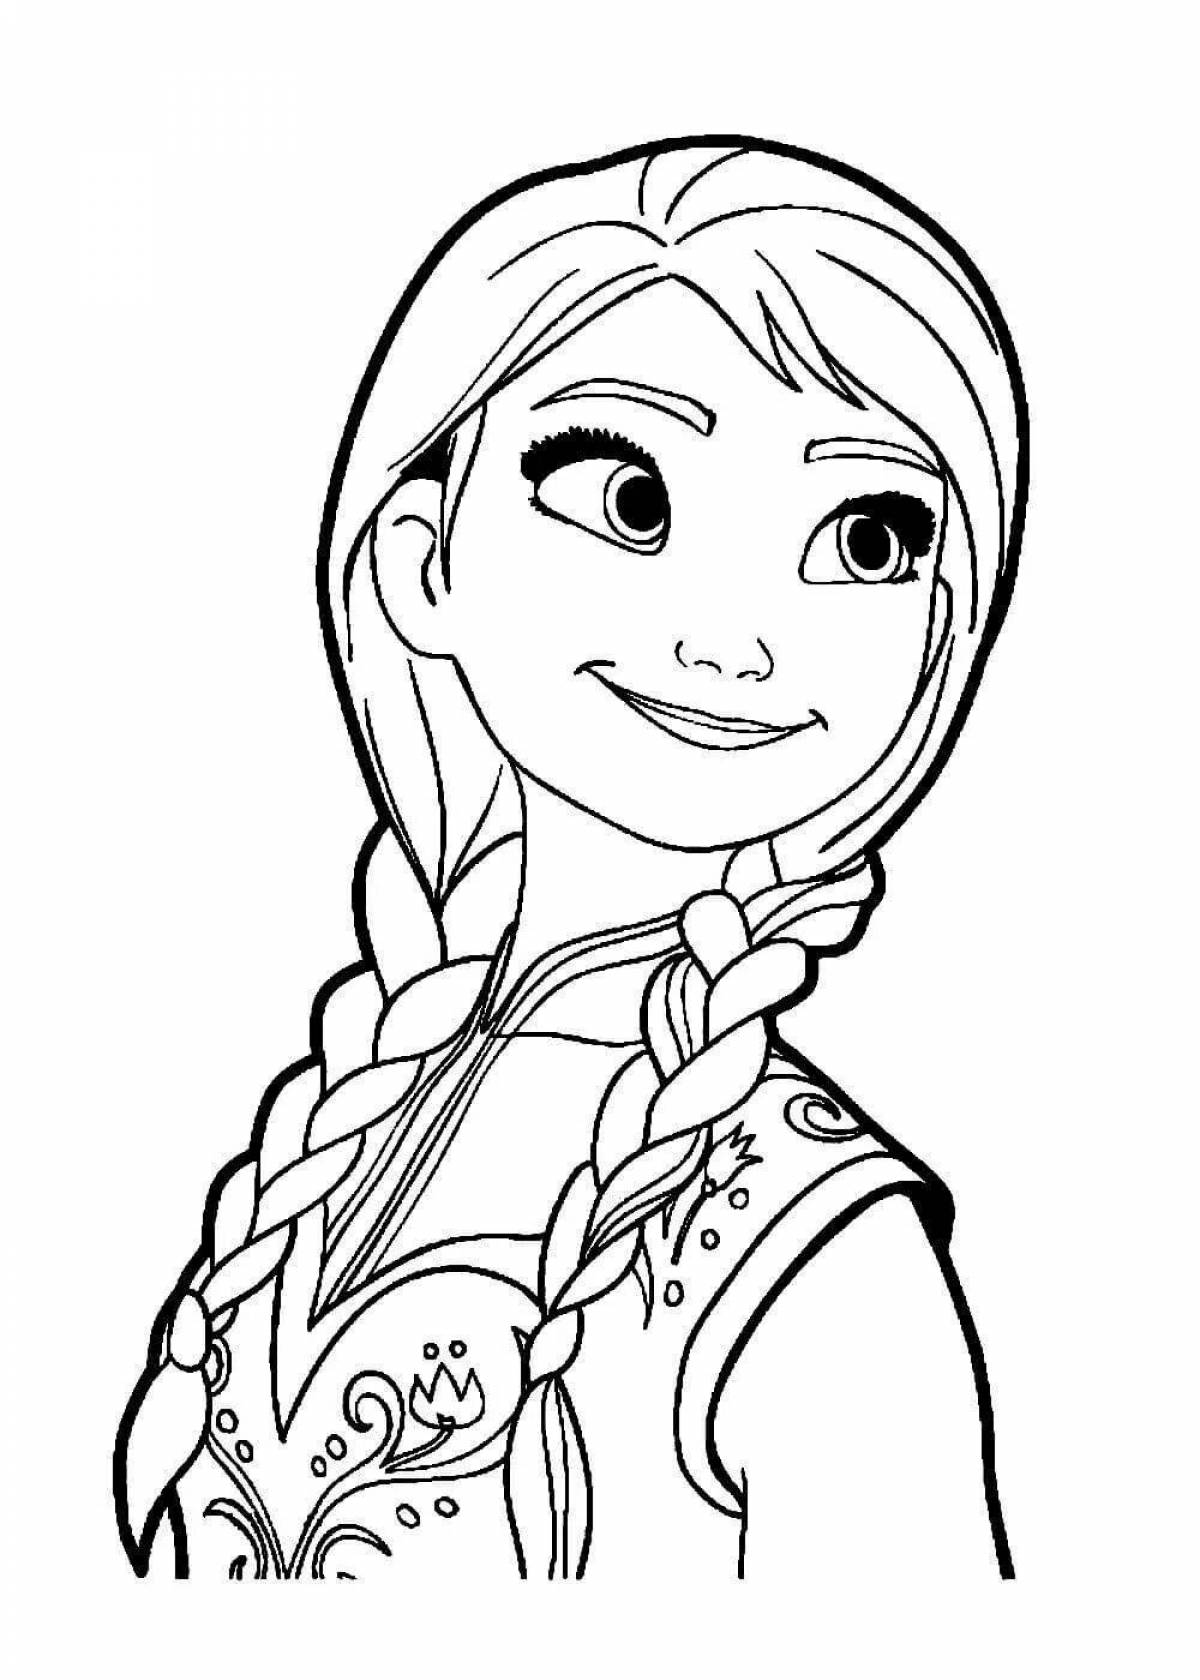 Awesome frozen heart coloring pages